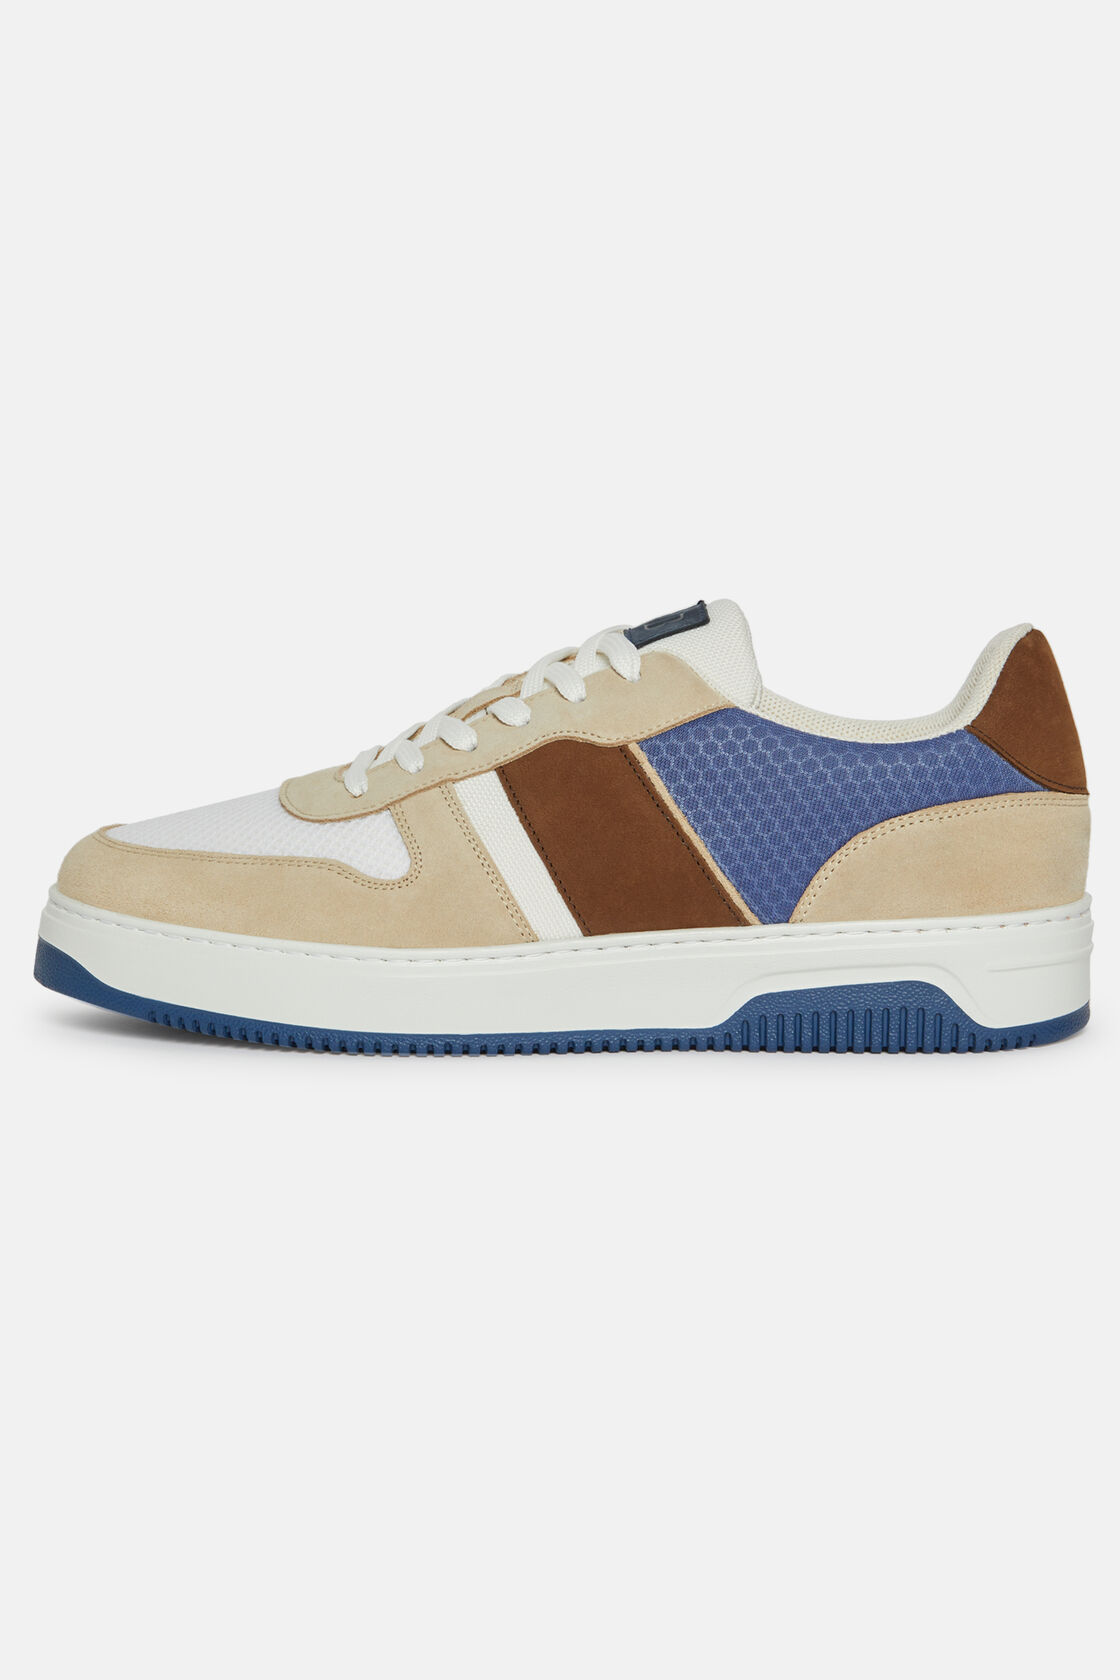 Beige Trainers in Leather and Technical Fabric, Light Blu, hi-res